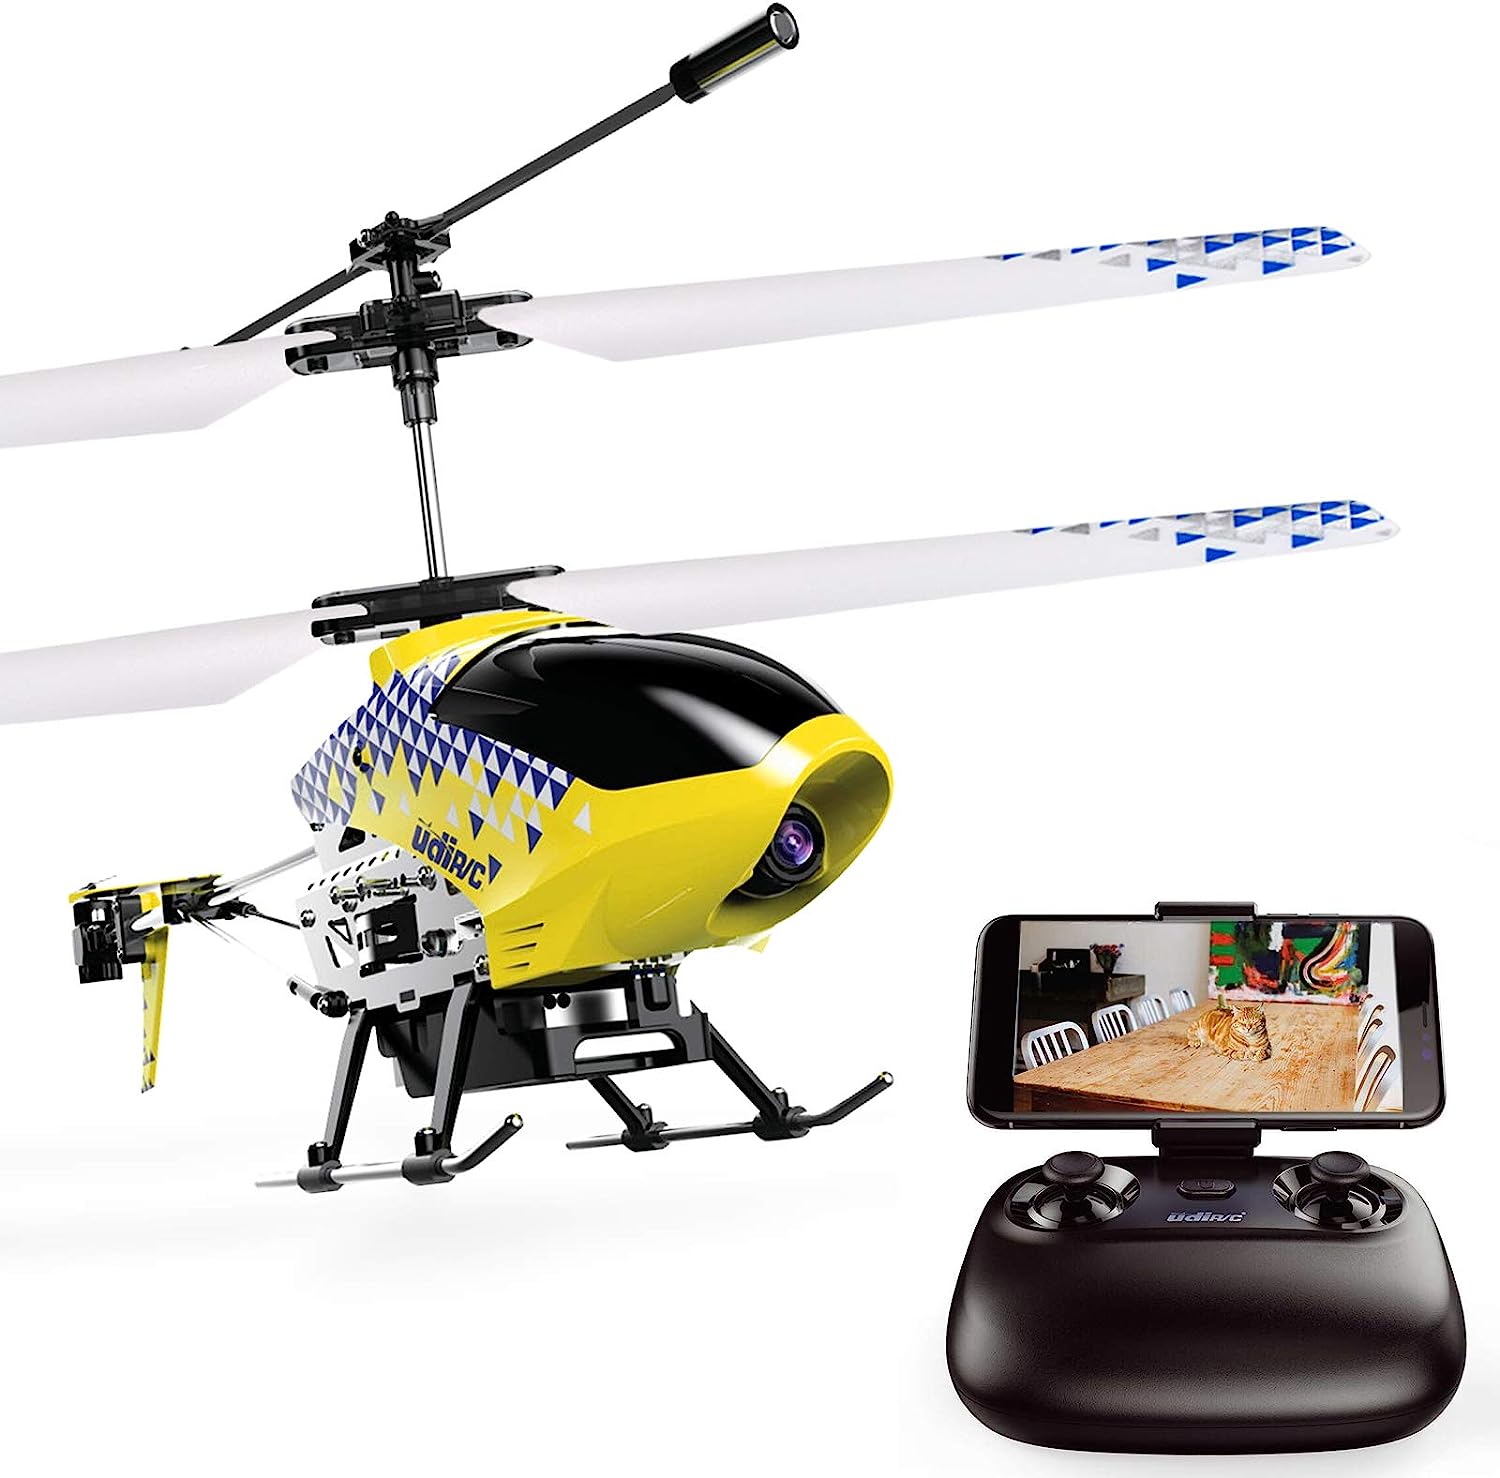 Cheerwing Helicopter